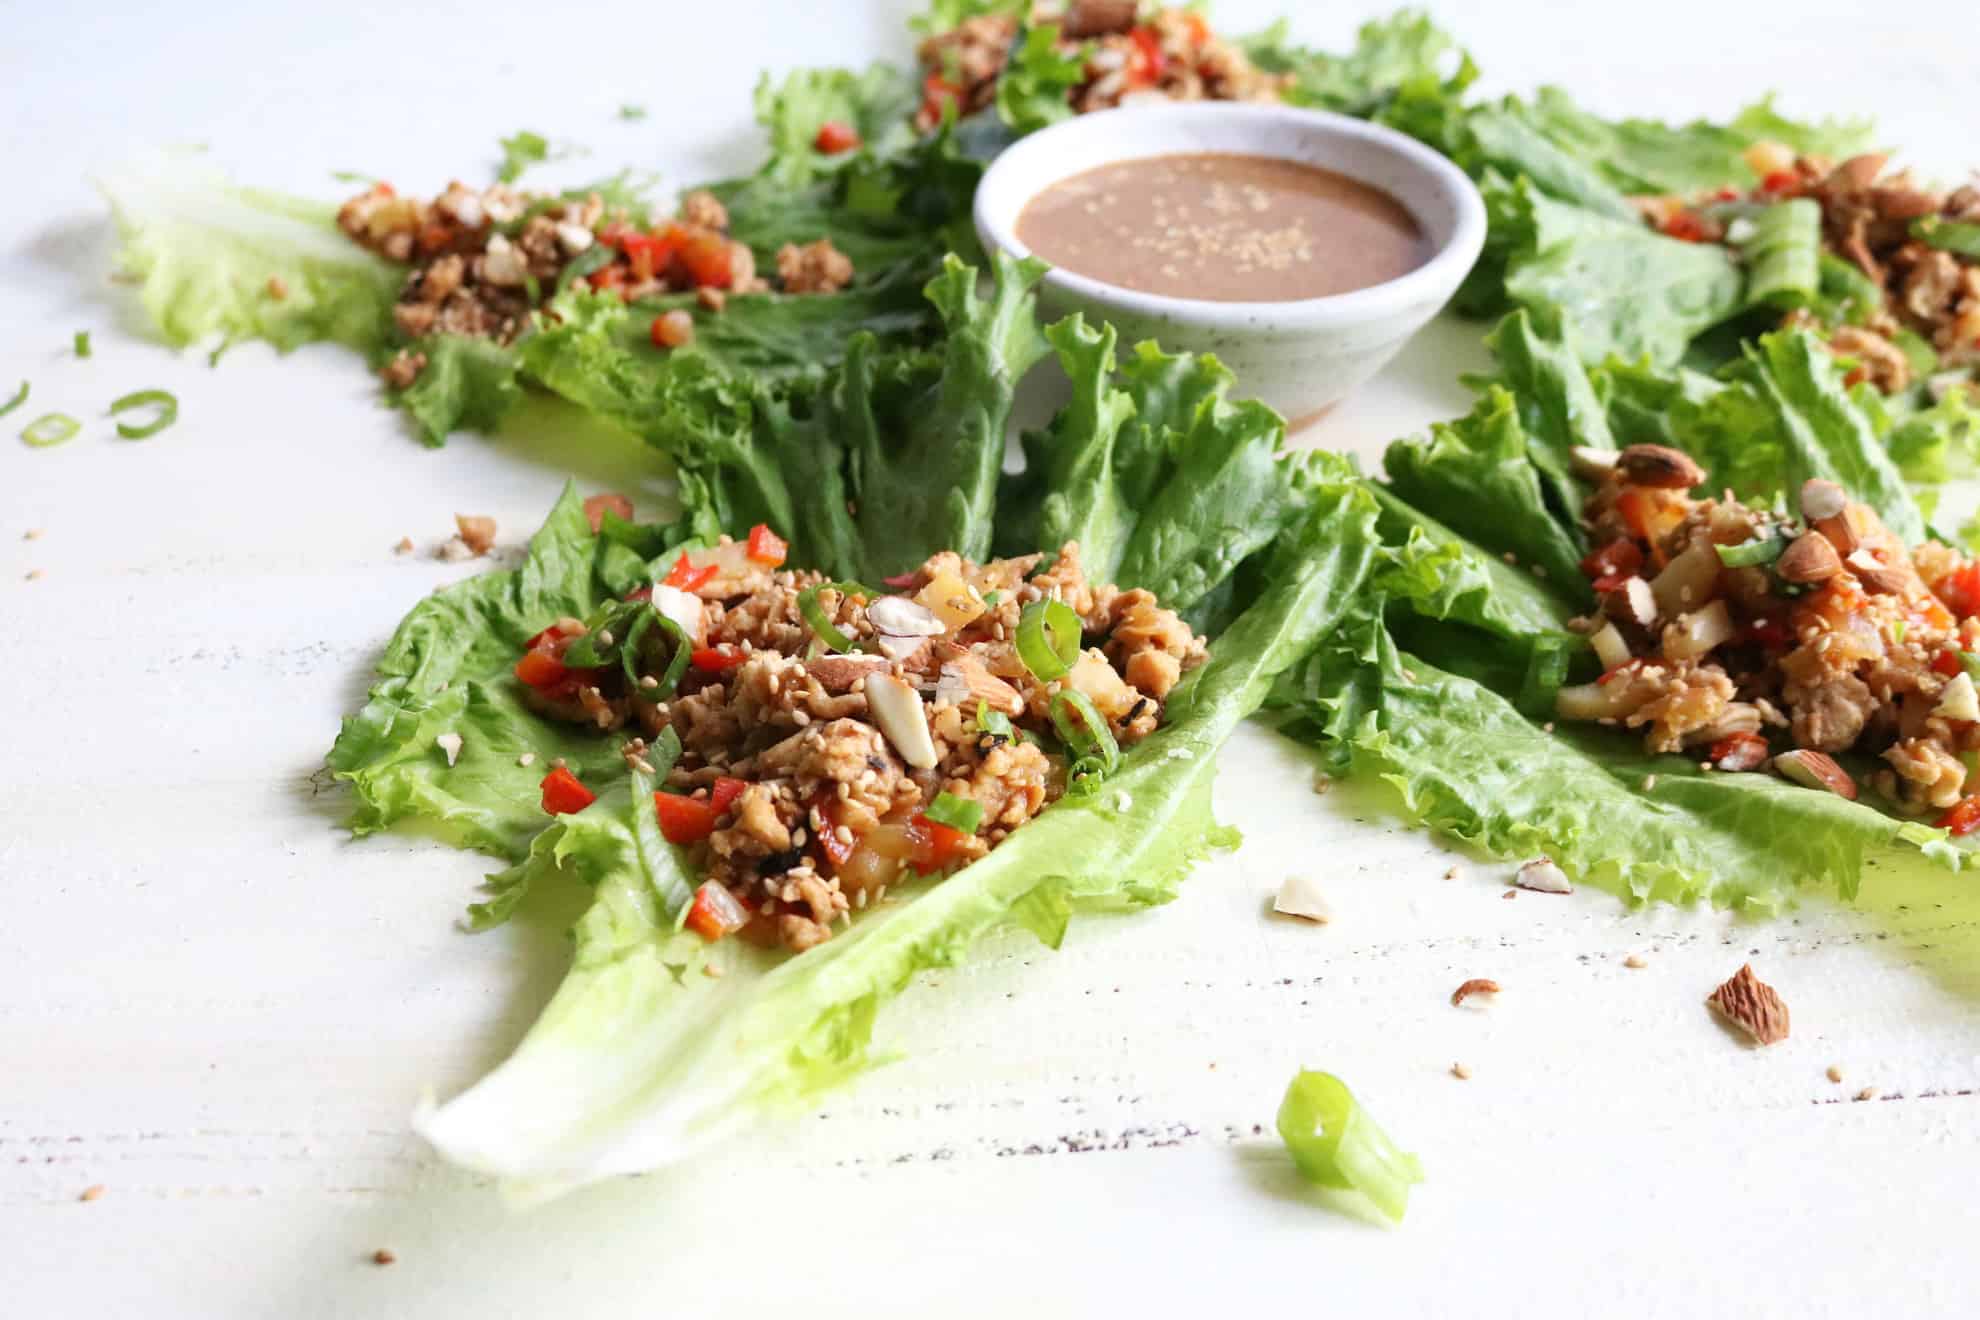 This is a side view of chicken lettuce wraps on a white surface. The lettuce wraps are arranged around a small white bowl with a sauce in it. 